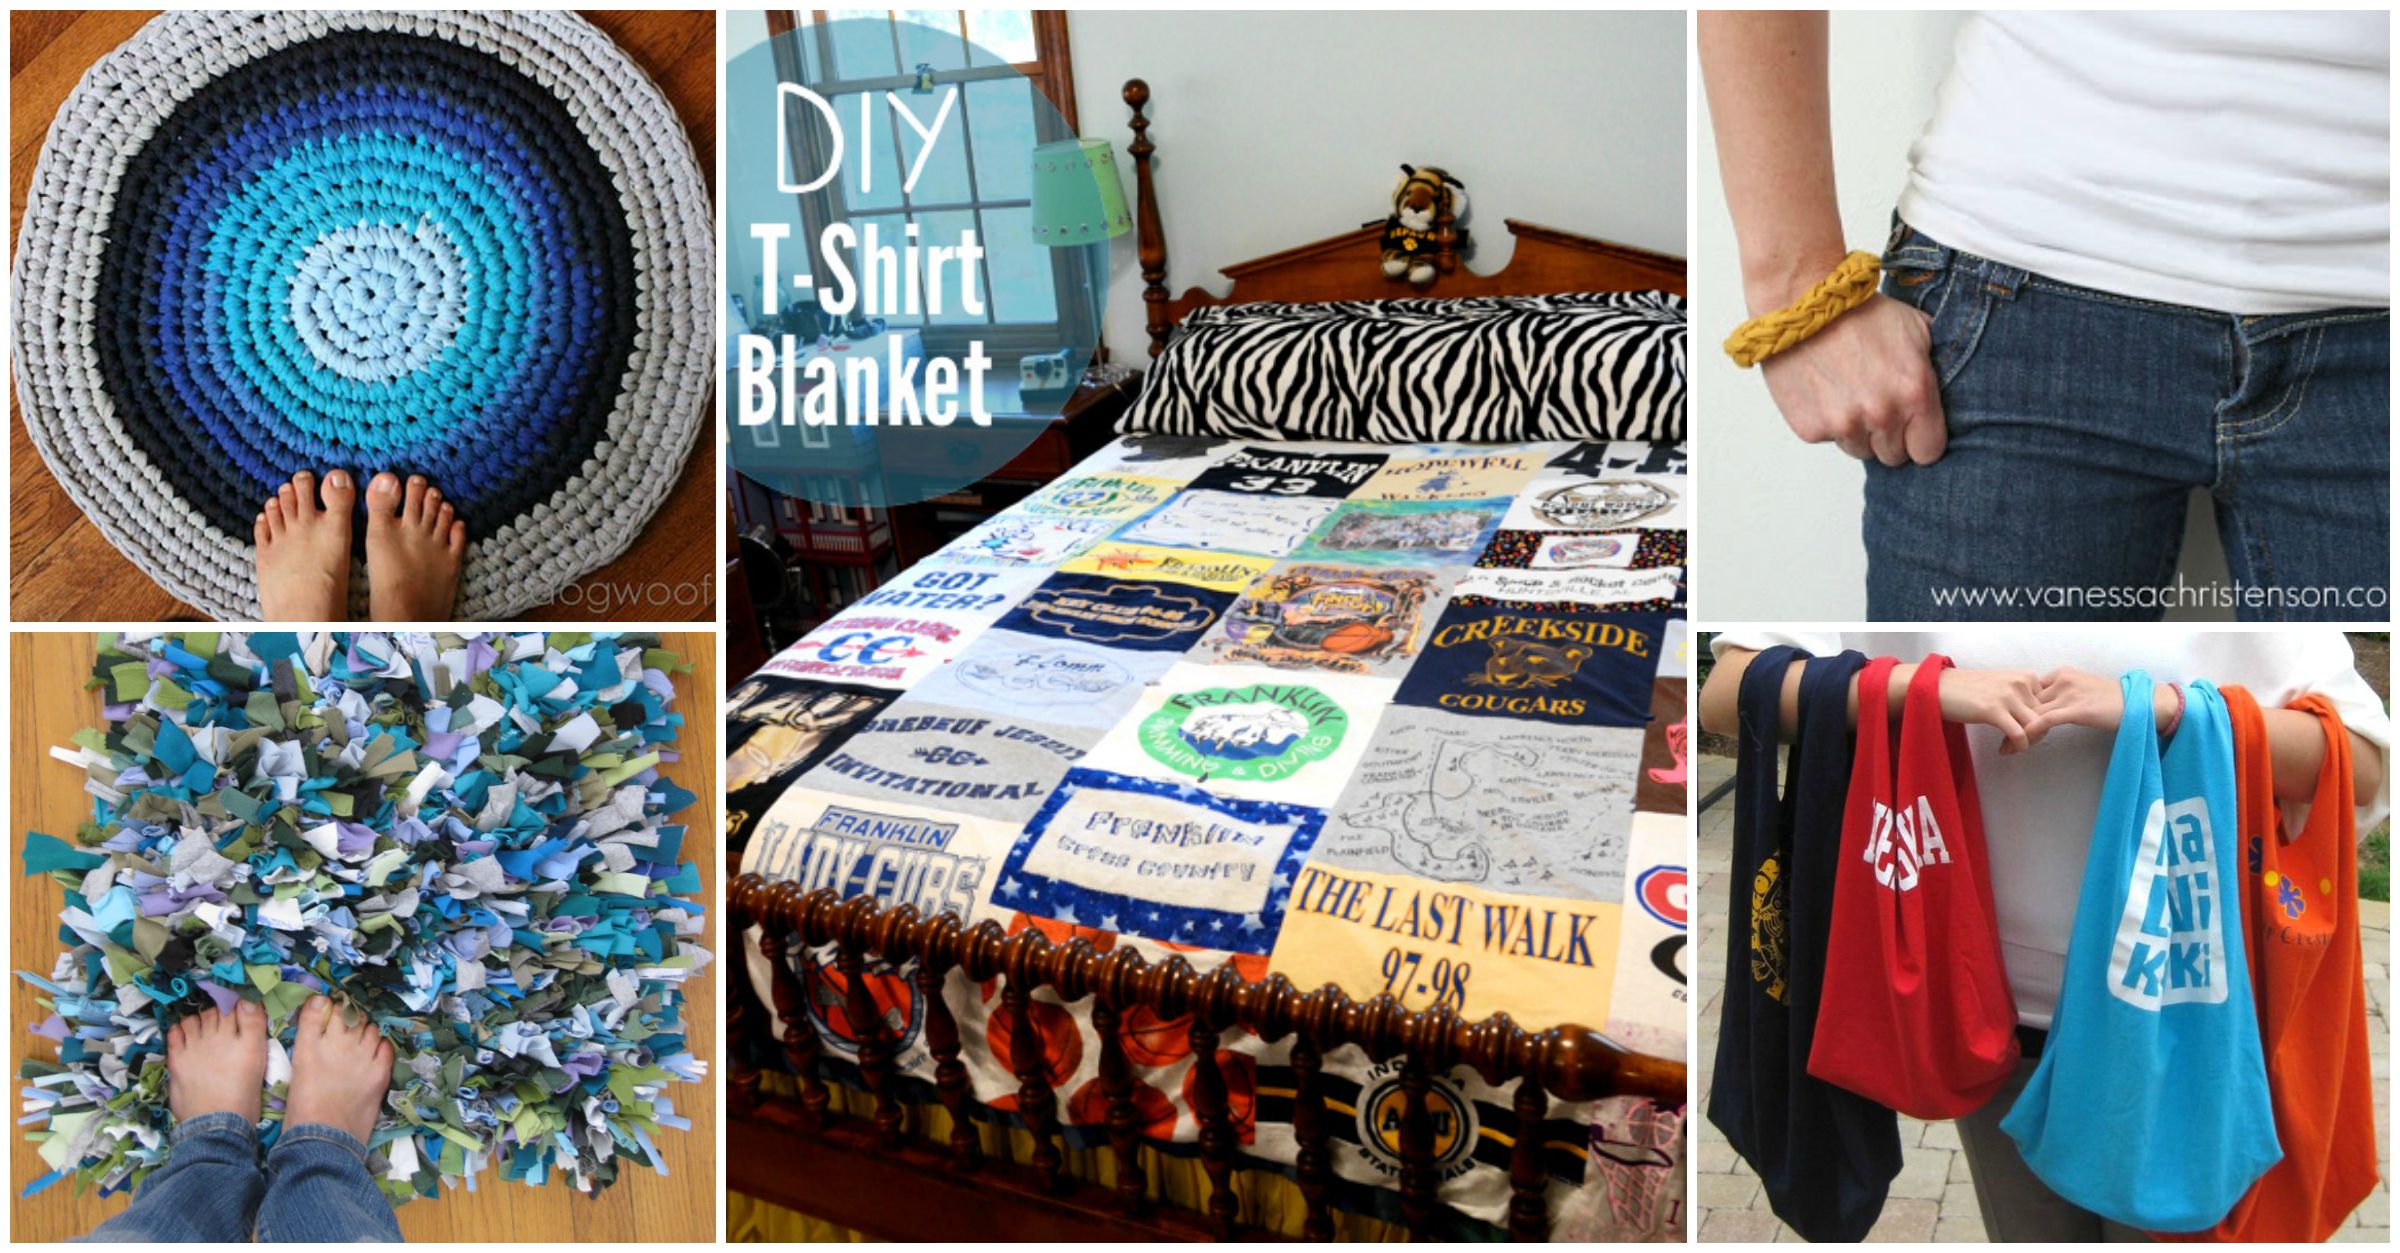 40+ Creative Ideas to Repurpose and Reuse Your Old T-shirts